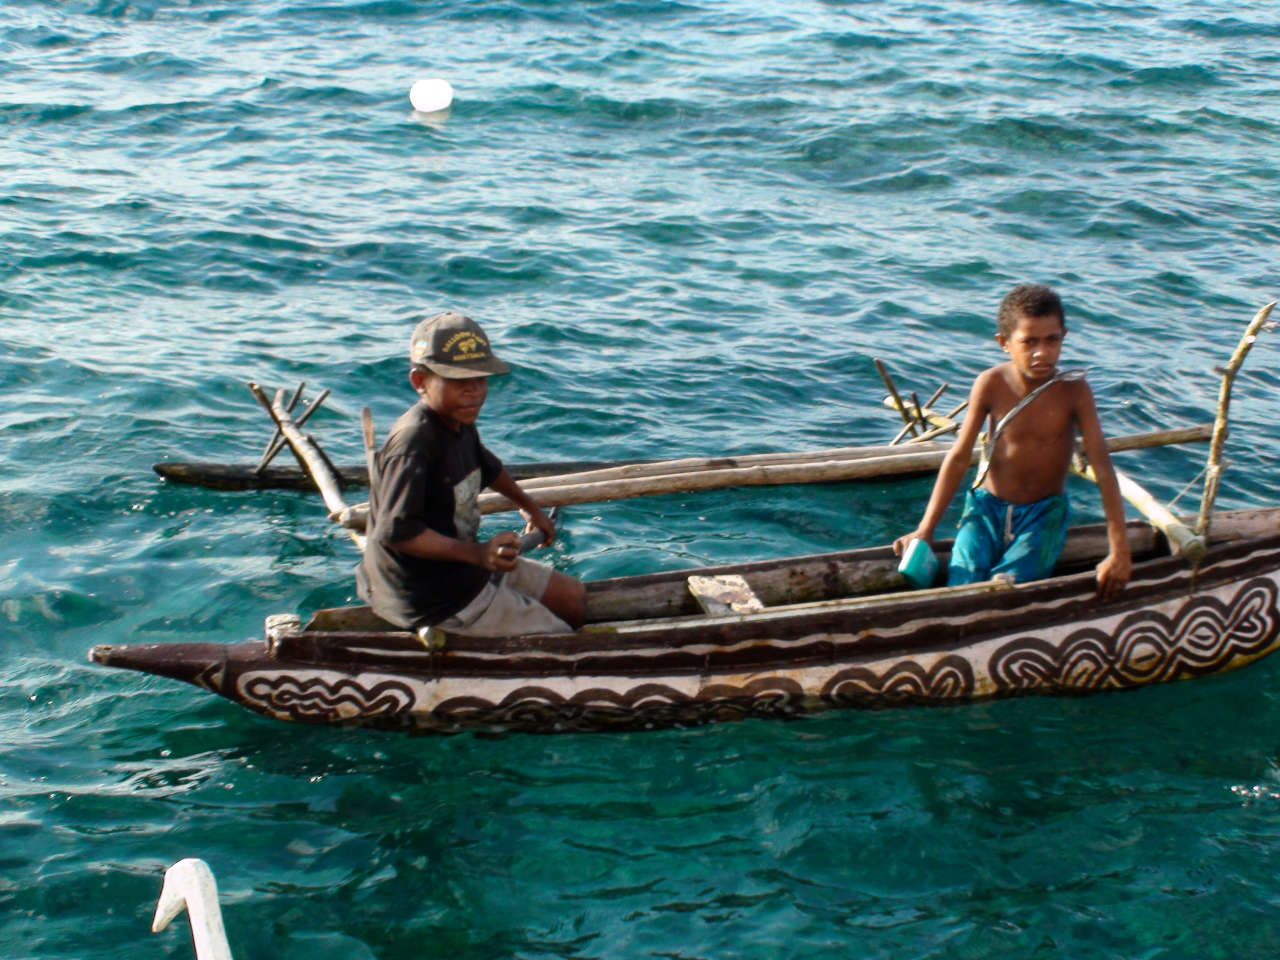 Local children in an outrigger canoe